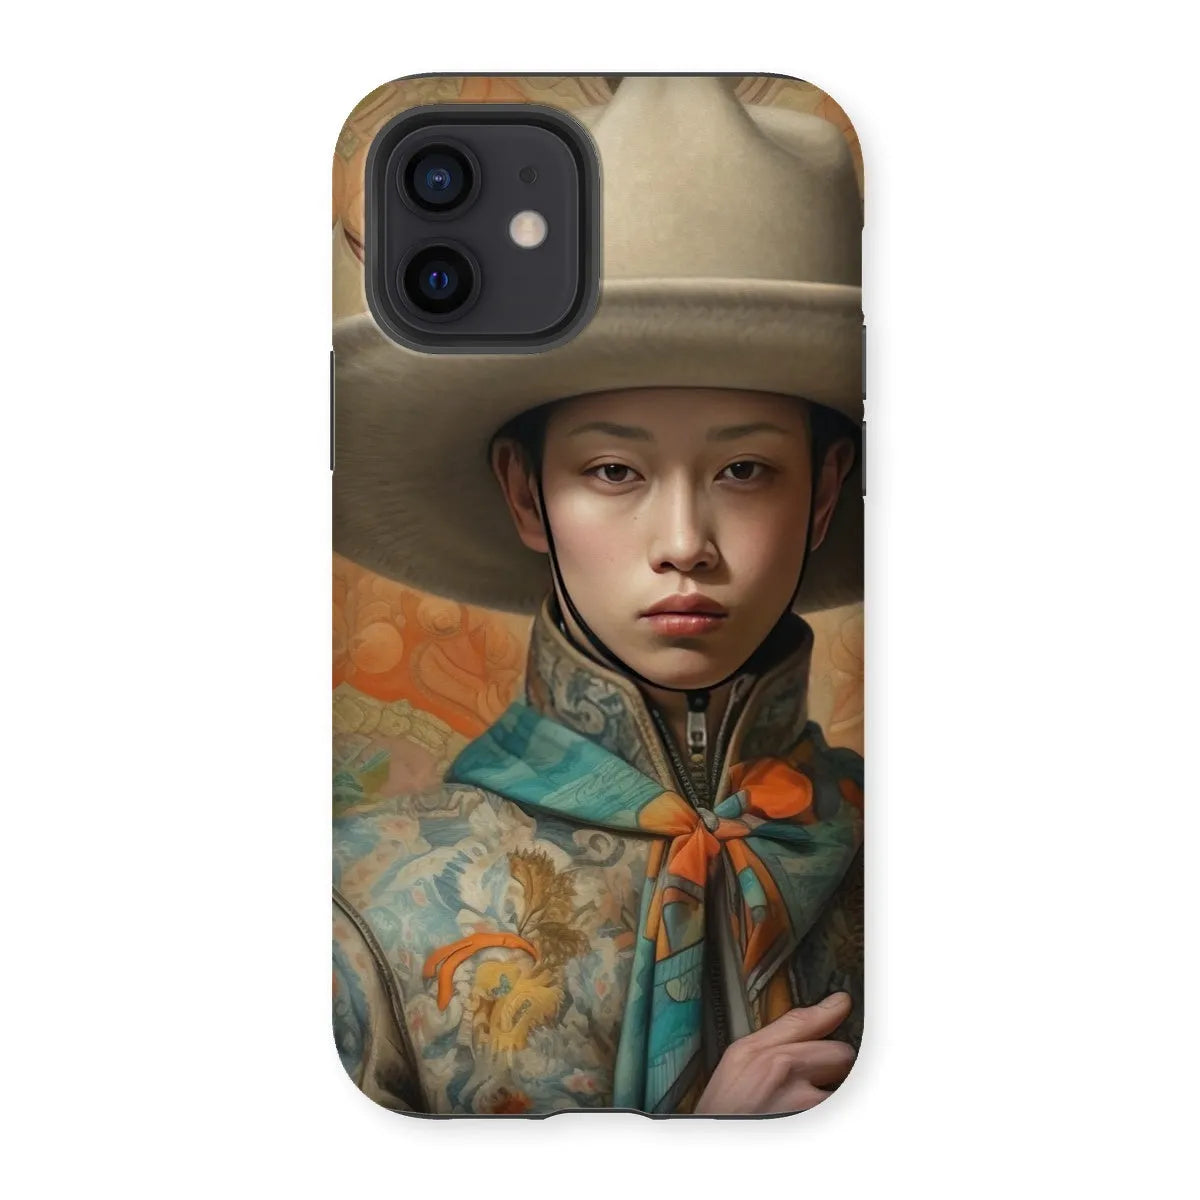 Xiang - Gaysian Chinese Cowboy Aesthetic Art Phone Case - Iphone 12 / Matte - Mobile Phone Cases - Aesthetic Art